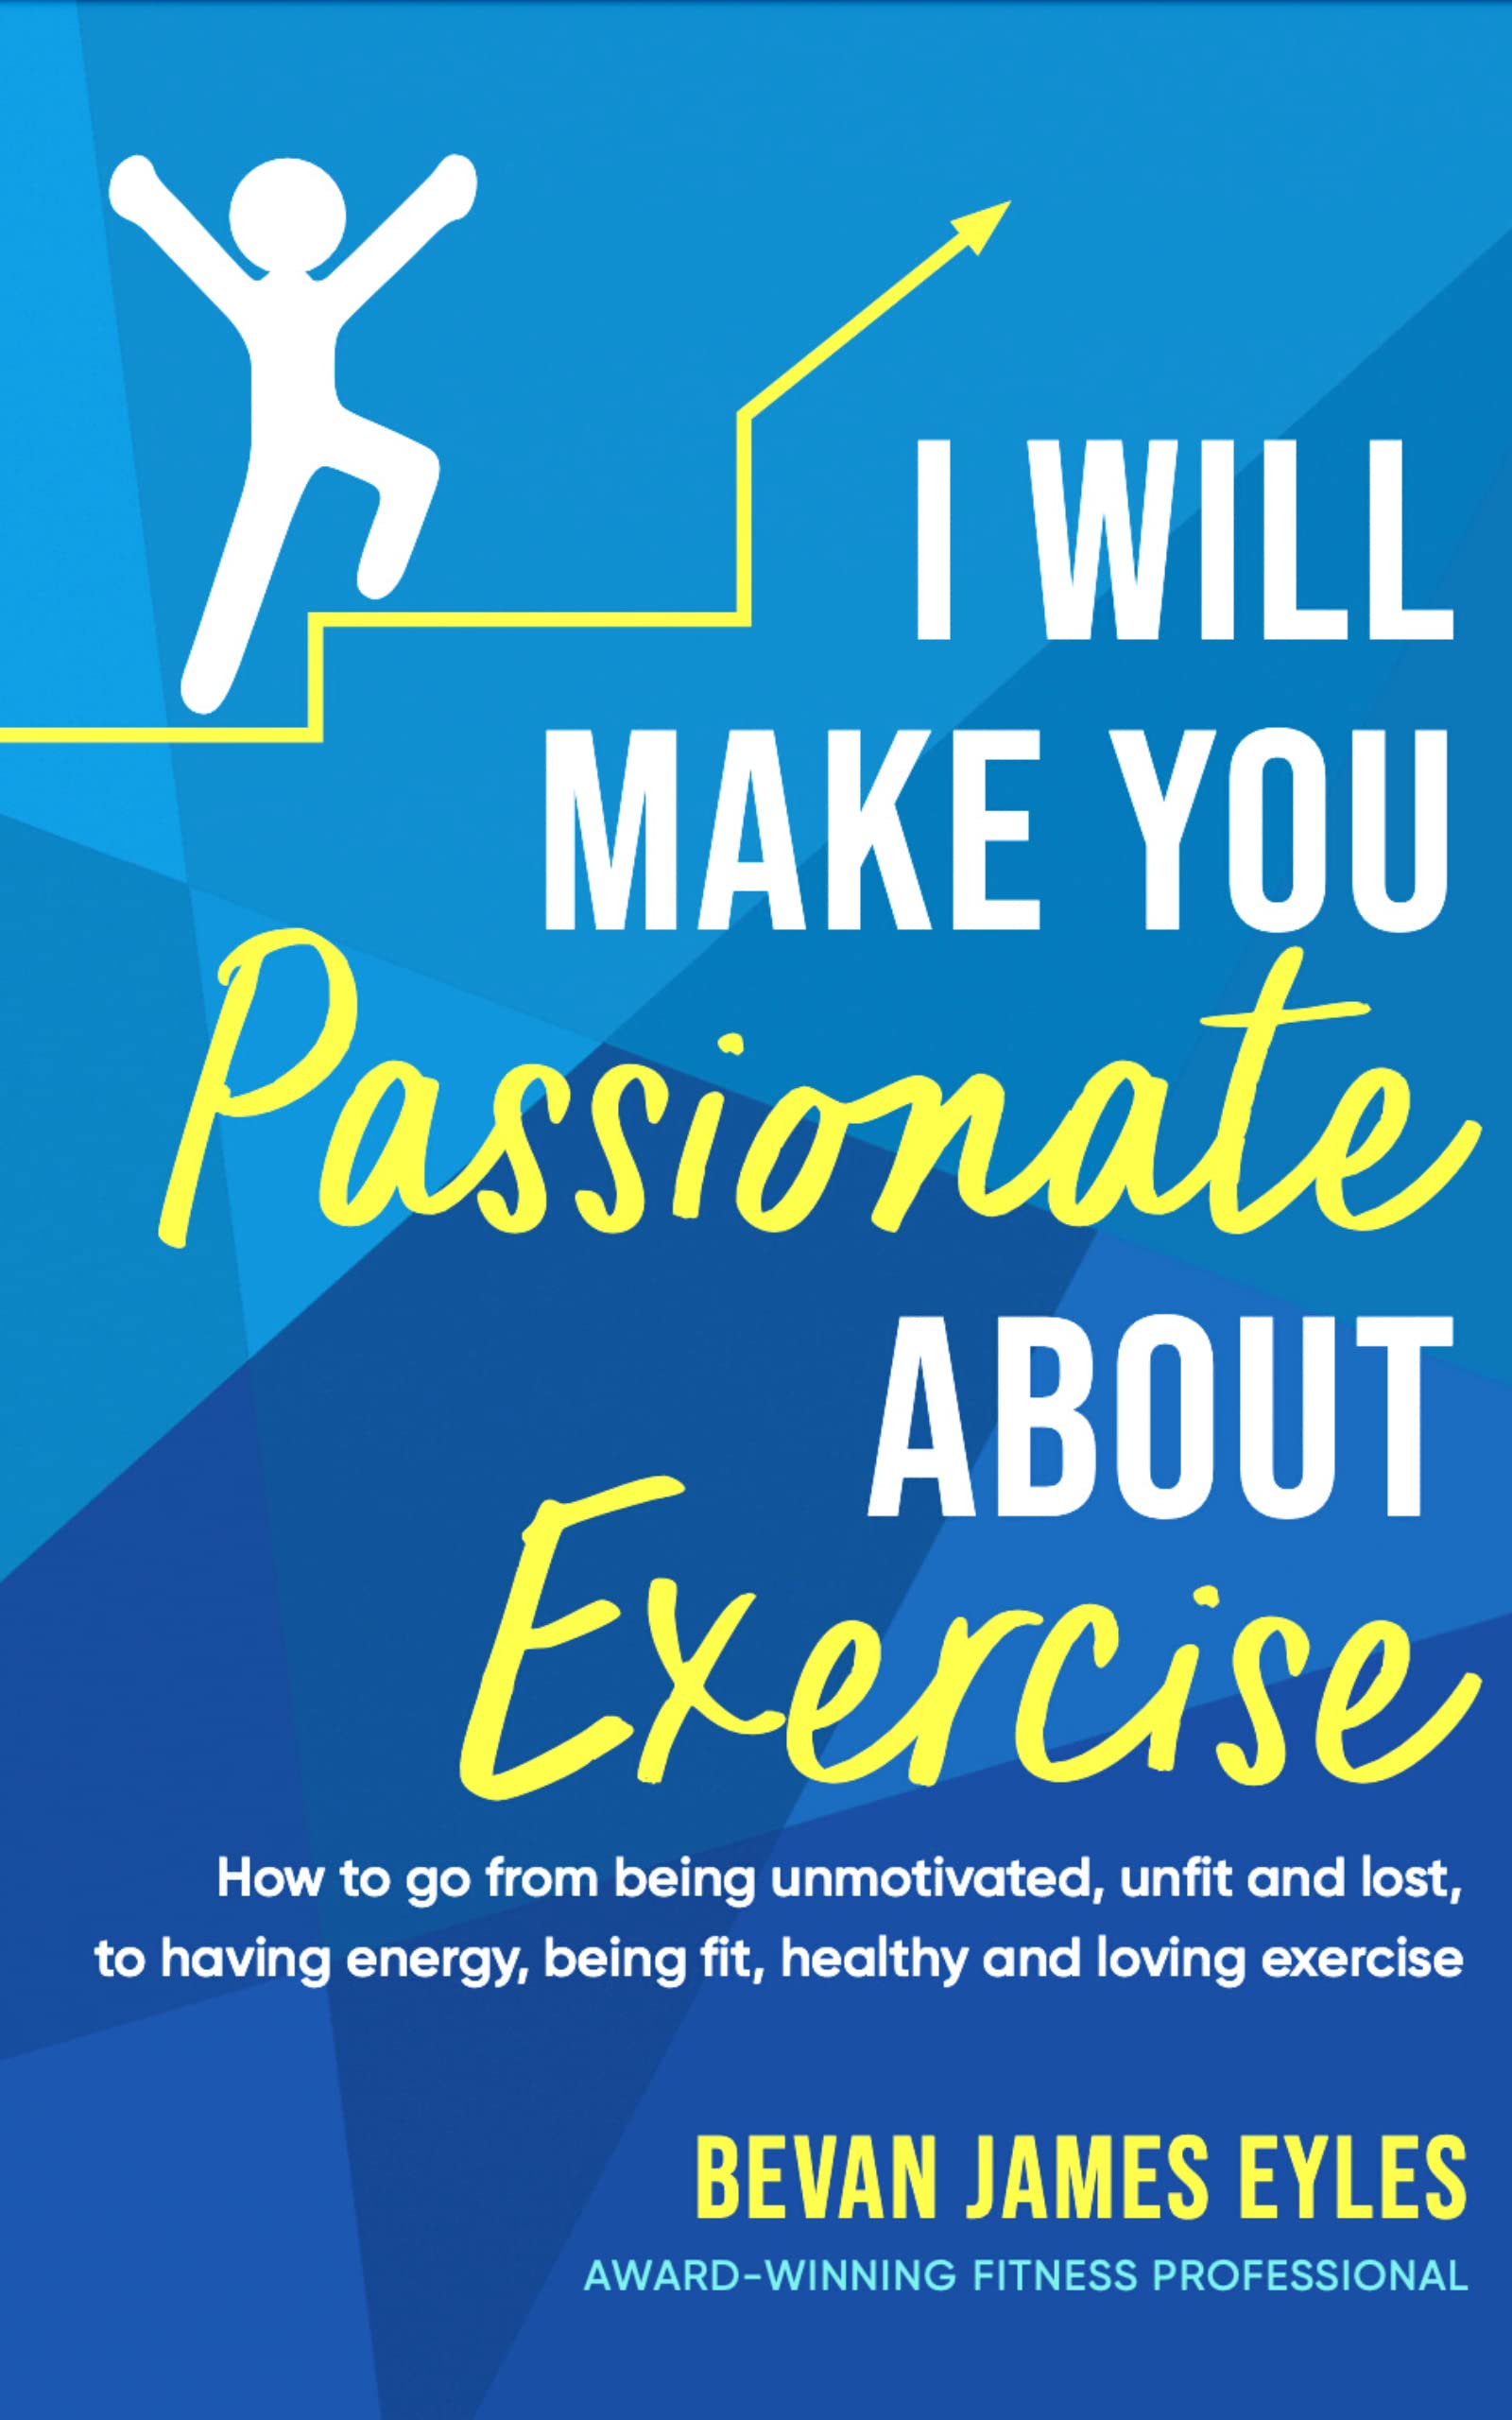 I Will Make You Passionate About Exercise: How to go from being unmotivated, unfit and lost, to having energy, being fit, healthy and loving exercise